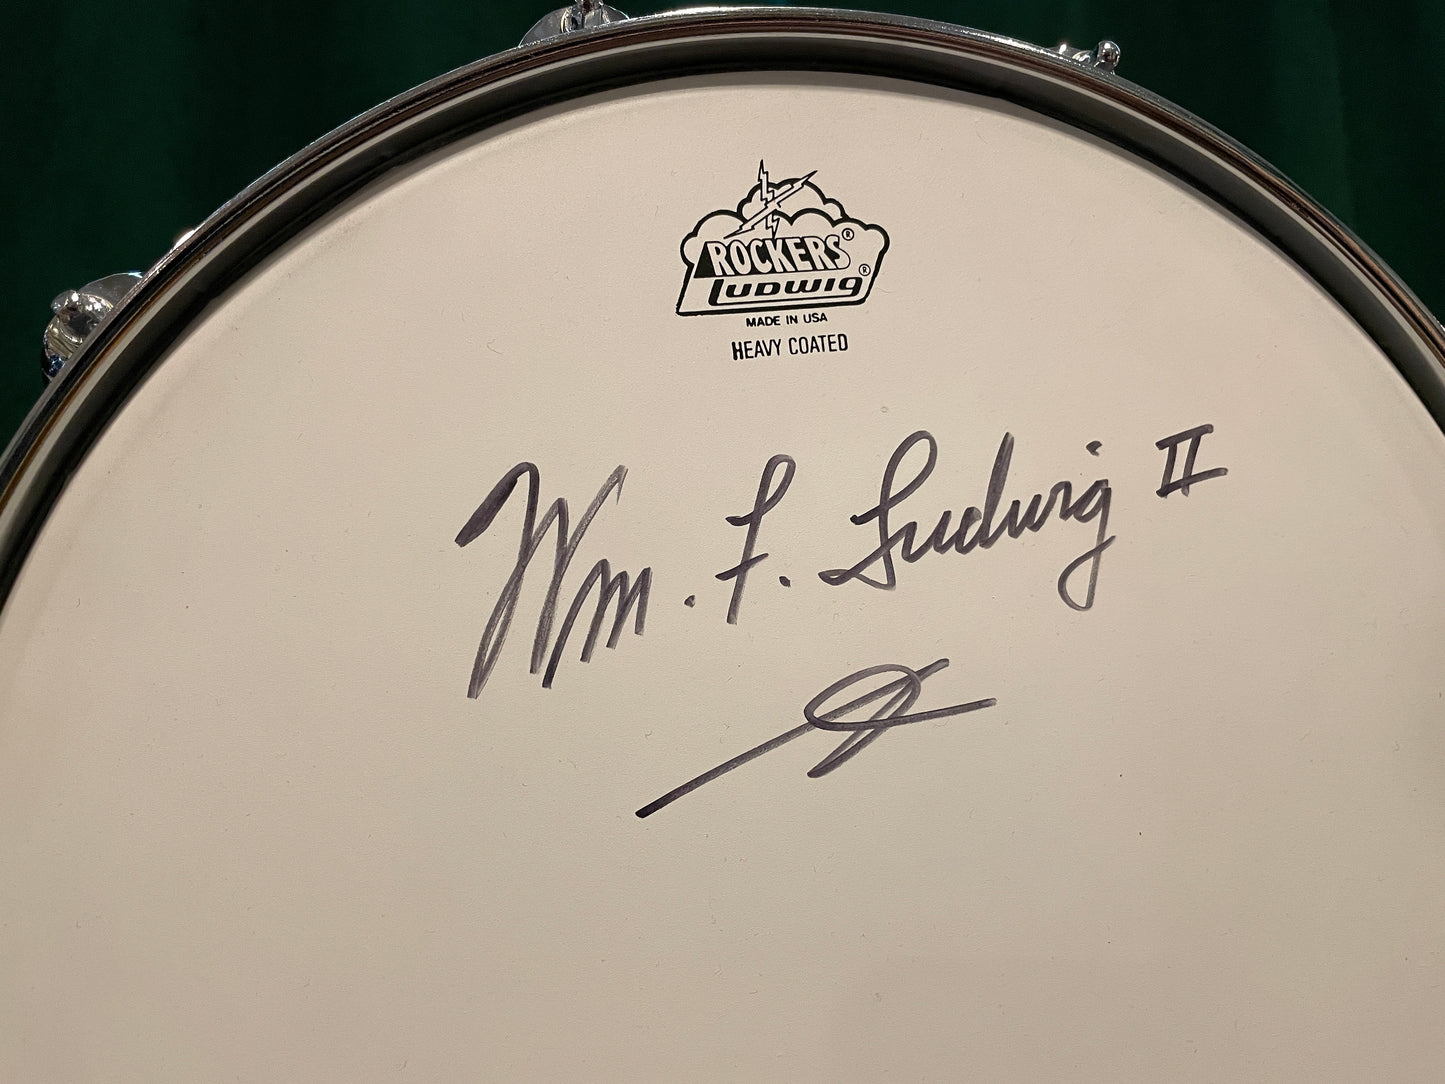 N.O.S. 1990s Ludwig 5x14 Wm. F. Ludwig II Signed Limited Edition Floral Engraved Black Beauty Snare Drum w/ Case